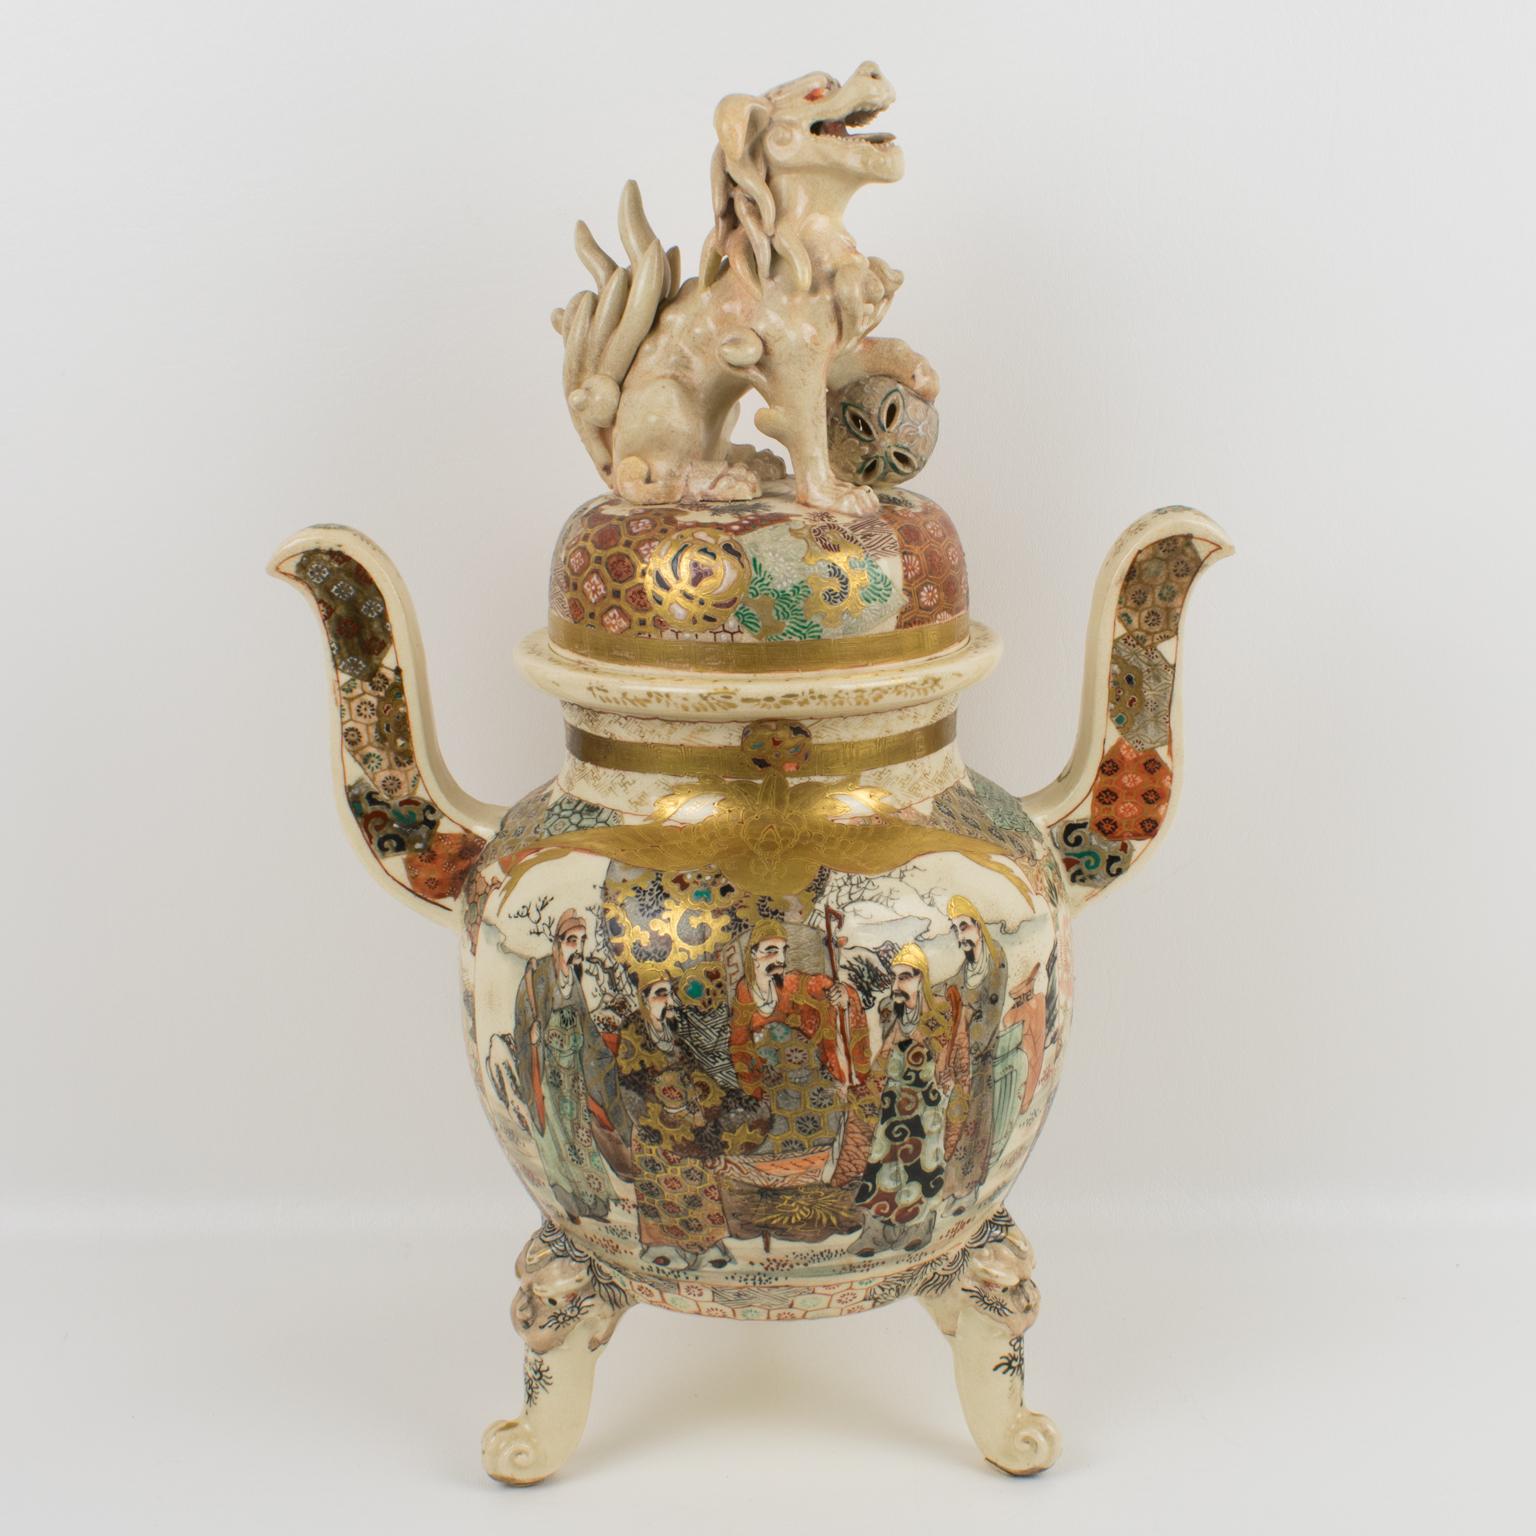 We present an exceptional Satsuma porcelain urn or covered vase from the Japanese Meiji era (1868-1912). Its splendor and uniqueness are undeniable. The lidded jar is richly decorated with enamel and hand-painted Lohan scenes with gilt accents and